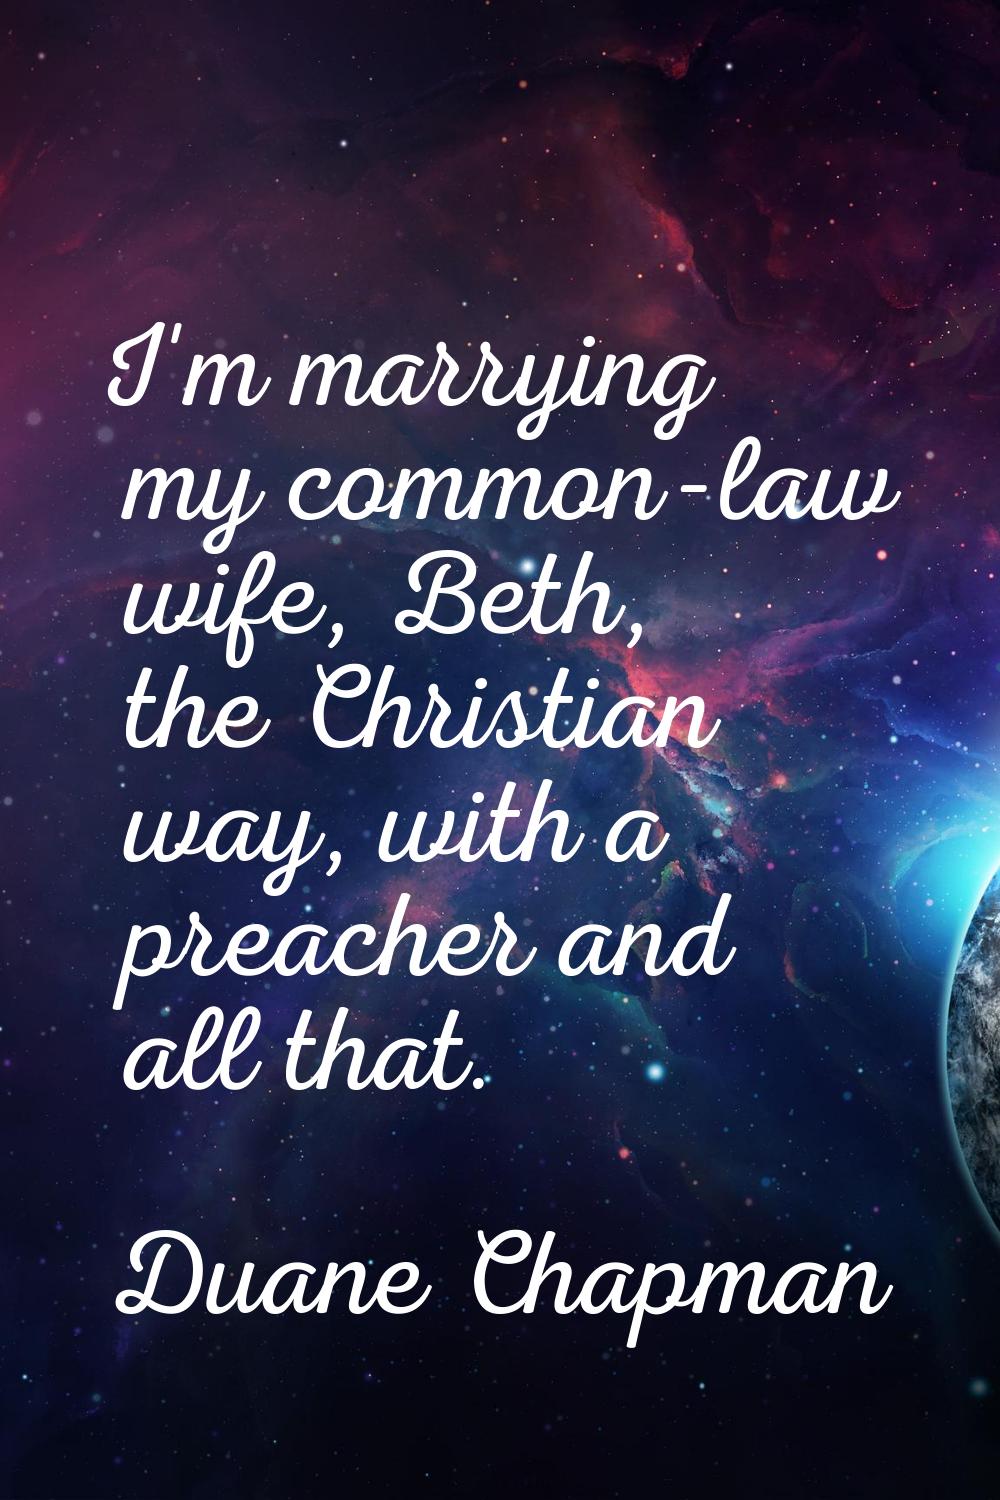 I'm marrying my common-law wife, Beth, the Christian way, with a preacher and all that.